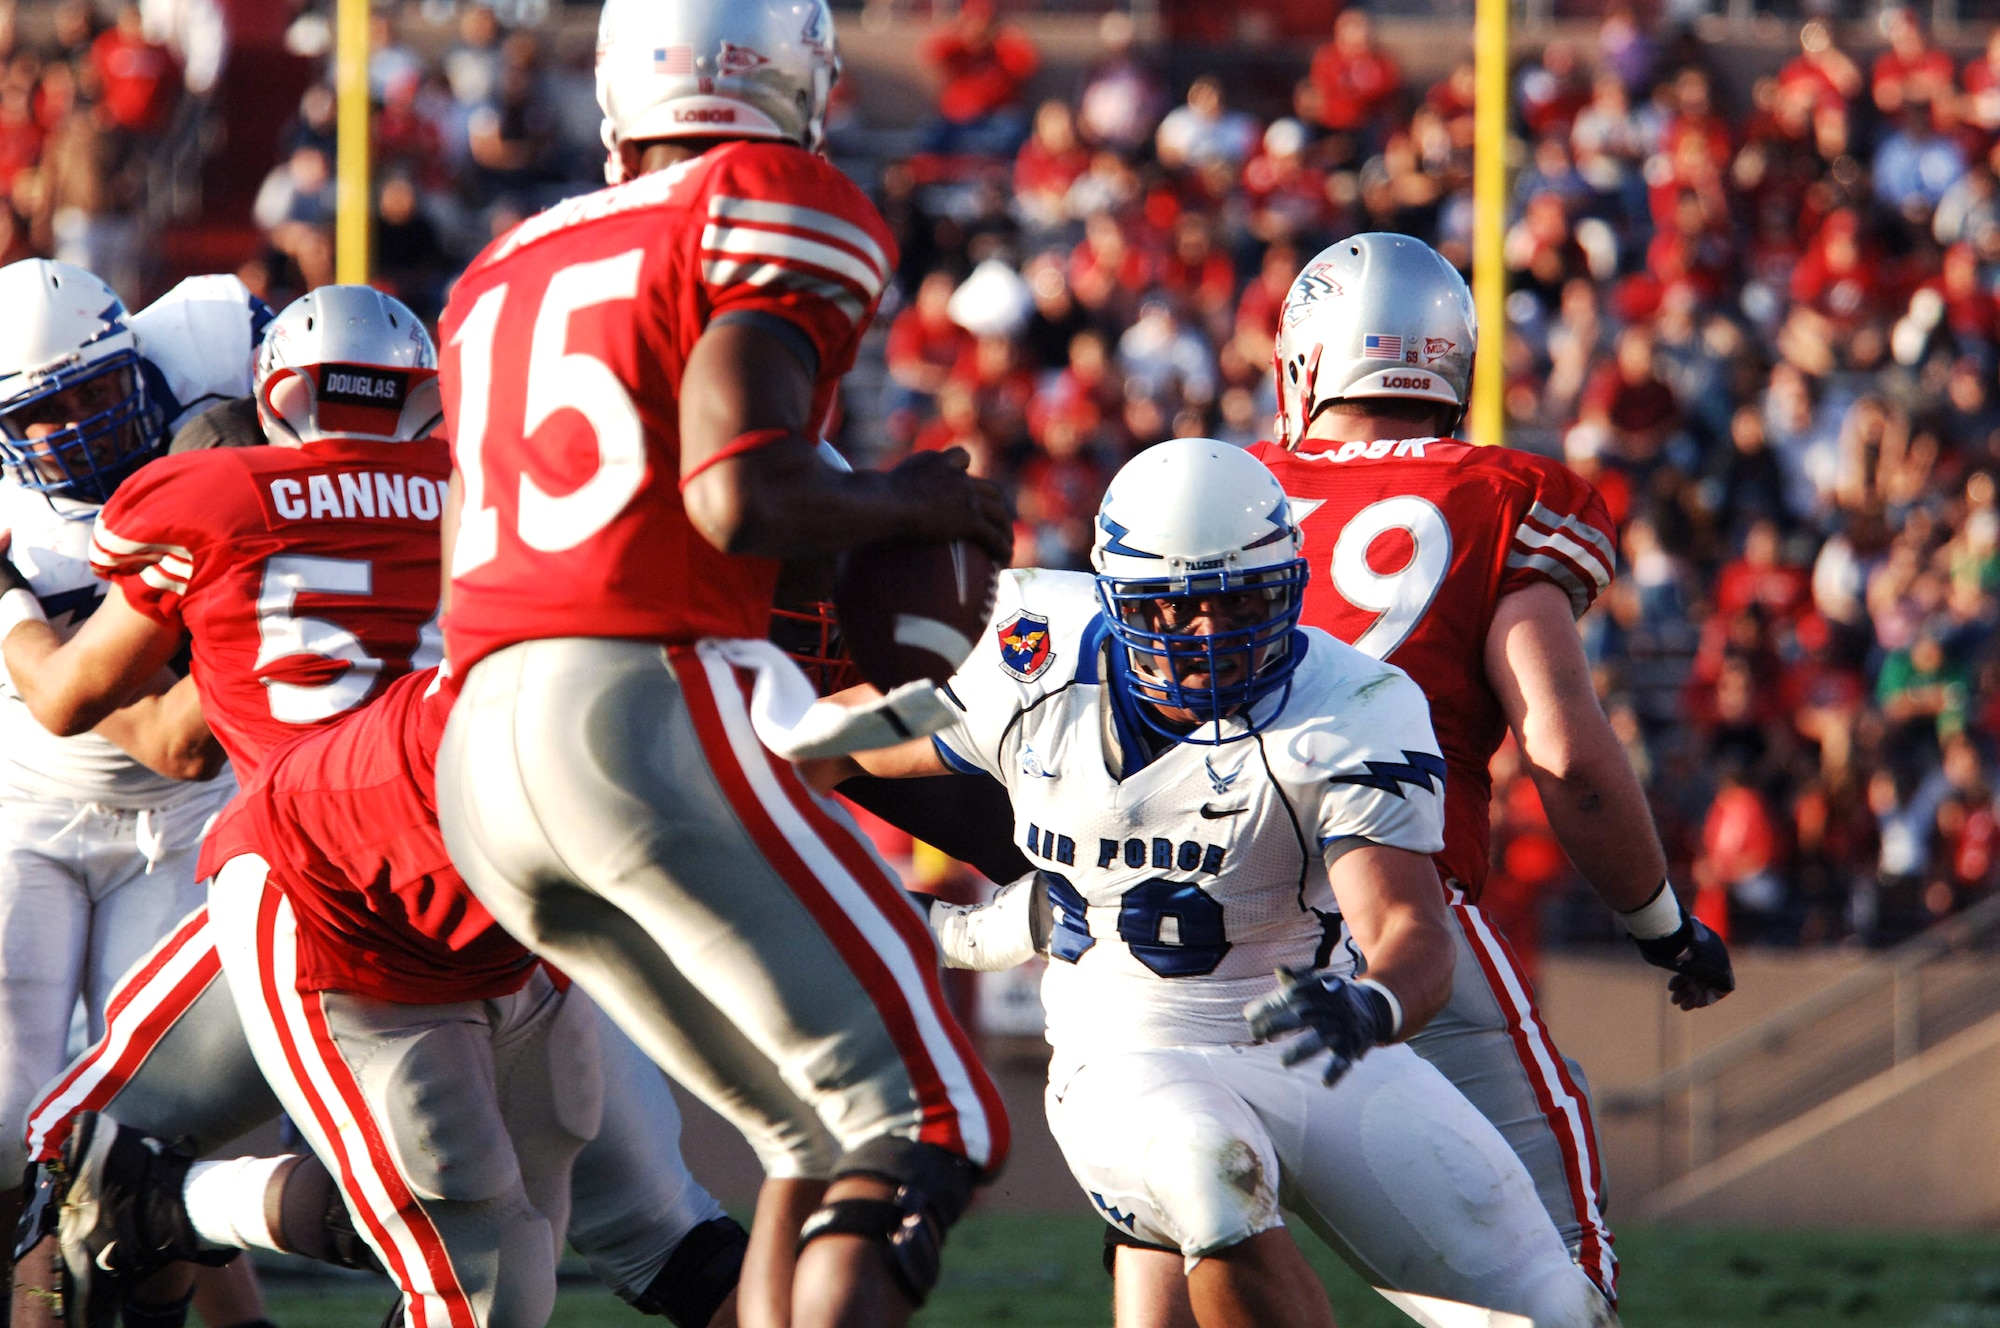 U.S. Air Force Academy defensive end Ryan Ricketts pressures New Mexico quarterback Donovan Porterie during football action Sept. 19, 2009, at Albuquerque, N.M. (U.S. Air Force photo/John Van Winkle)
